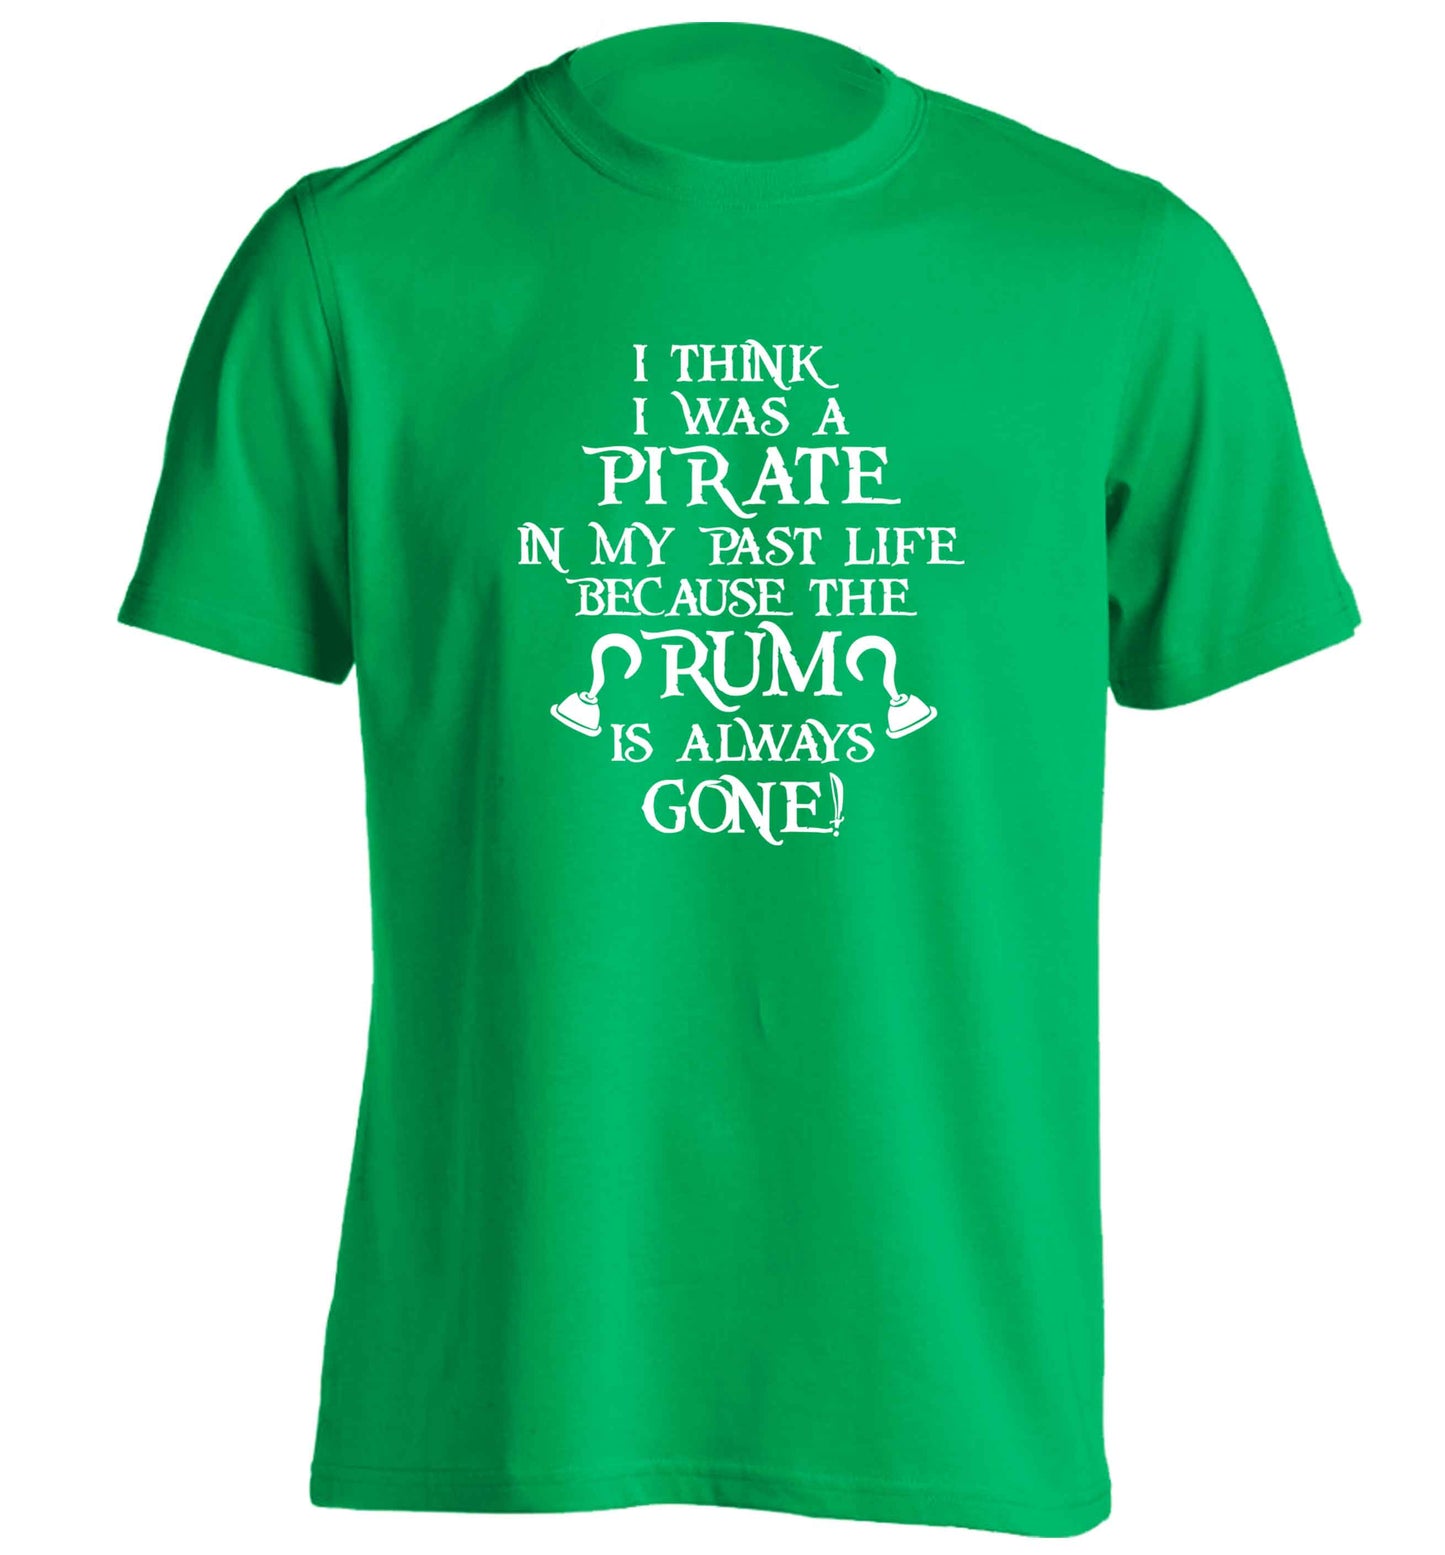 I think I was a pirate in my past life the rum is always gone adults unisex green Tshirt 2XL